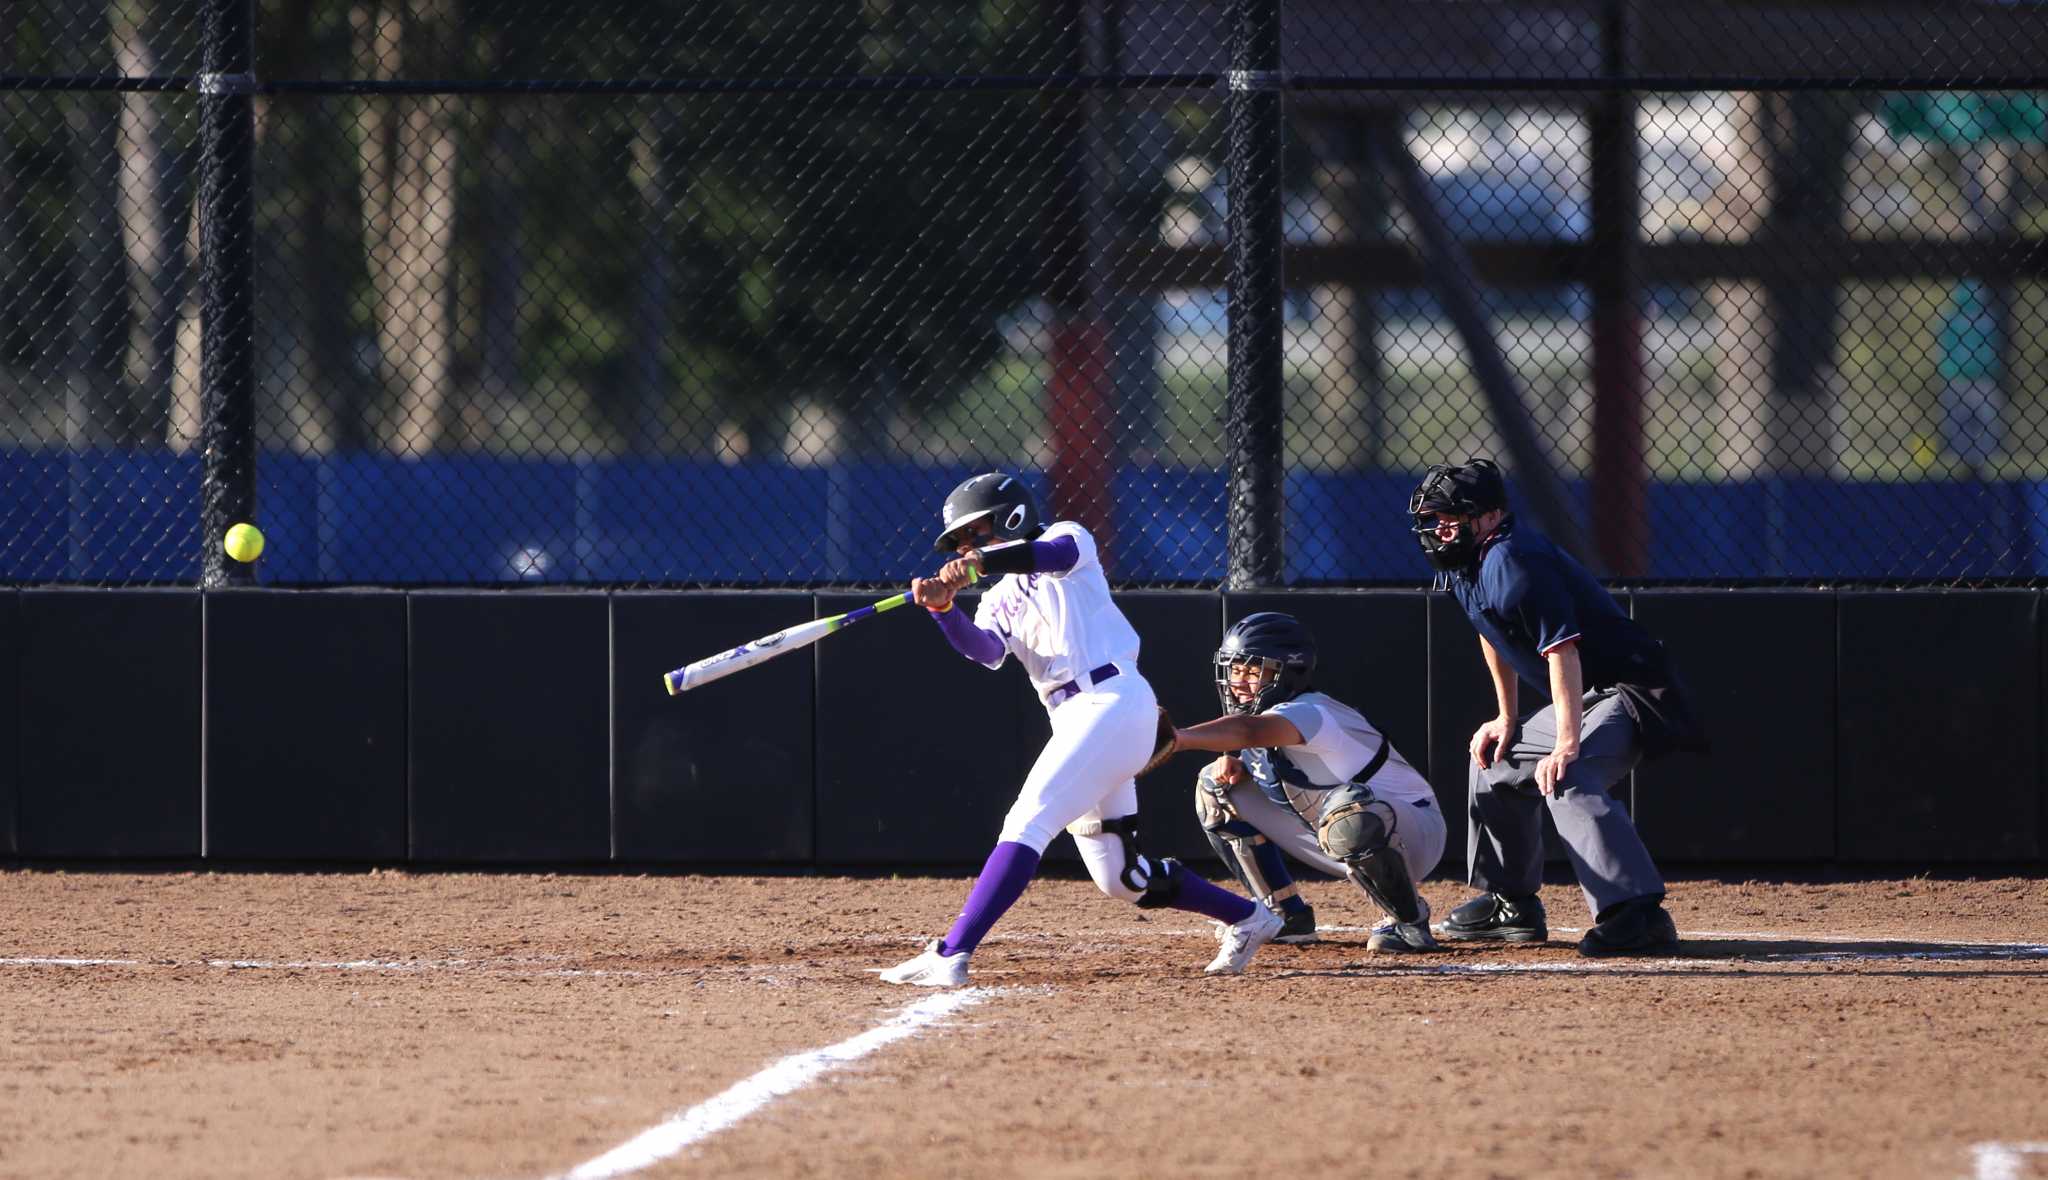 SF State Gators women softball team Madison Collins (13) makes a strike during the second doubleheader softball game against Cal State San Bernardino. SF State won 8-2 over Cal State San Bernardino on Saturday, February 20, 2016. (Perng-chih Huang / Xpress) 